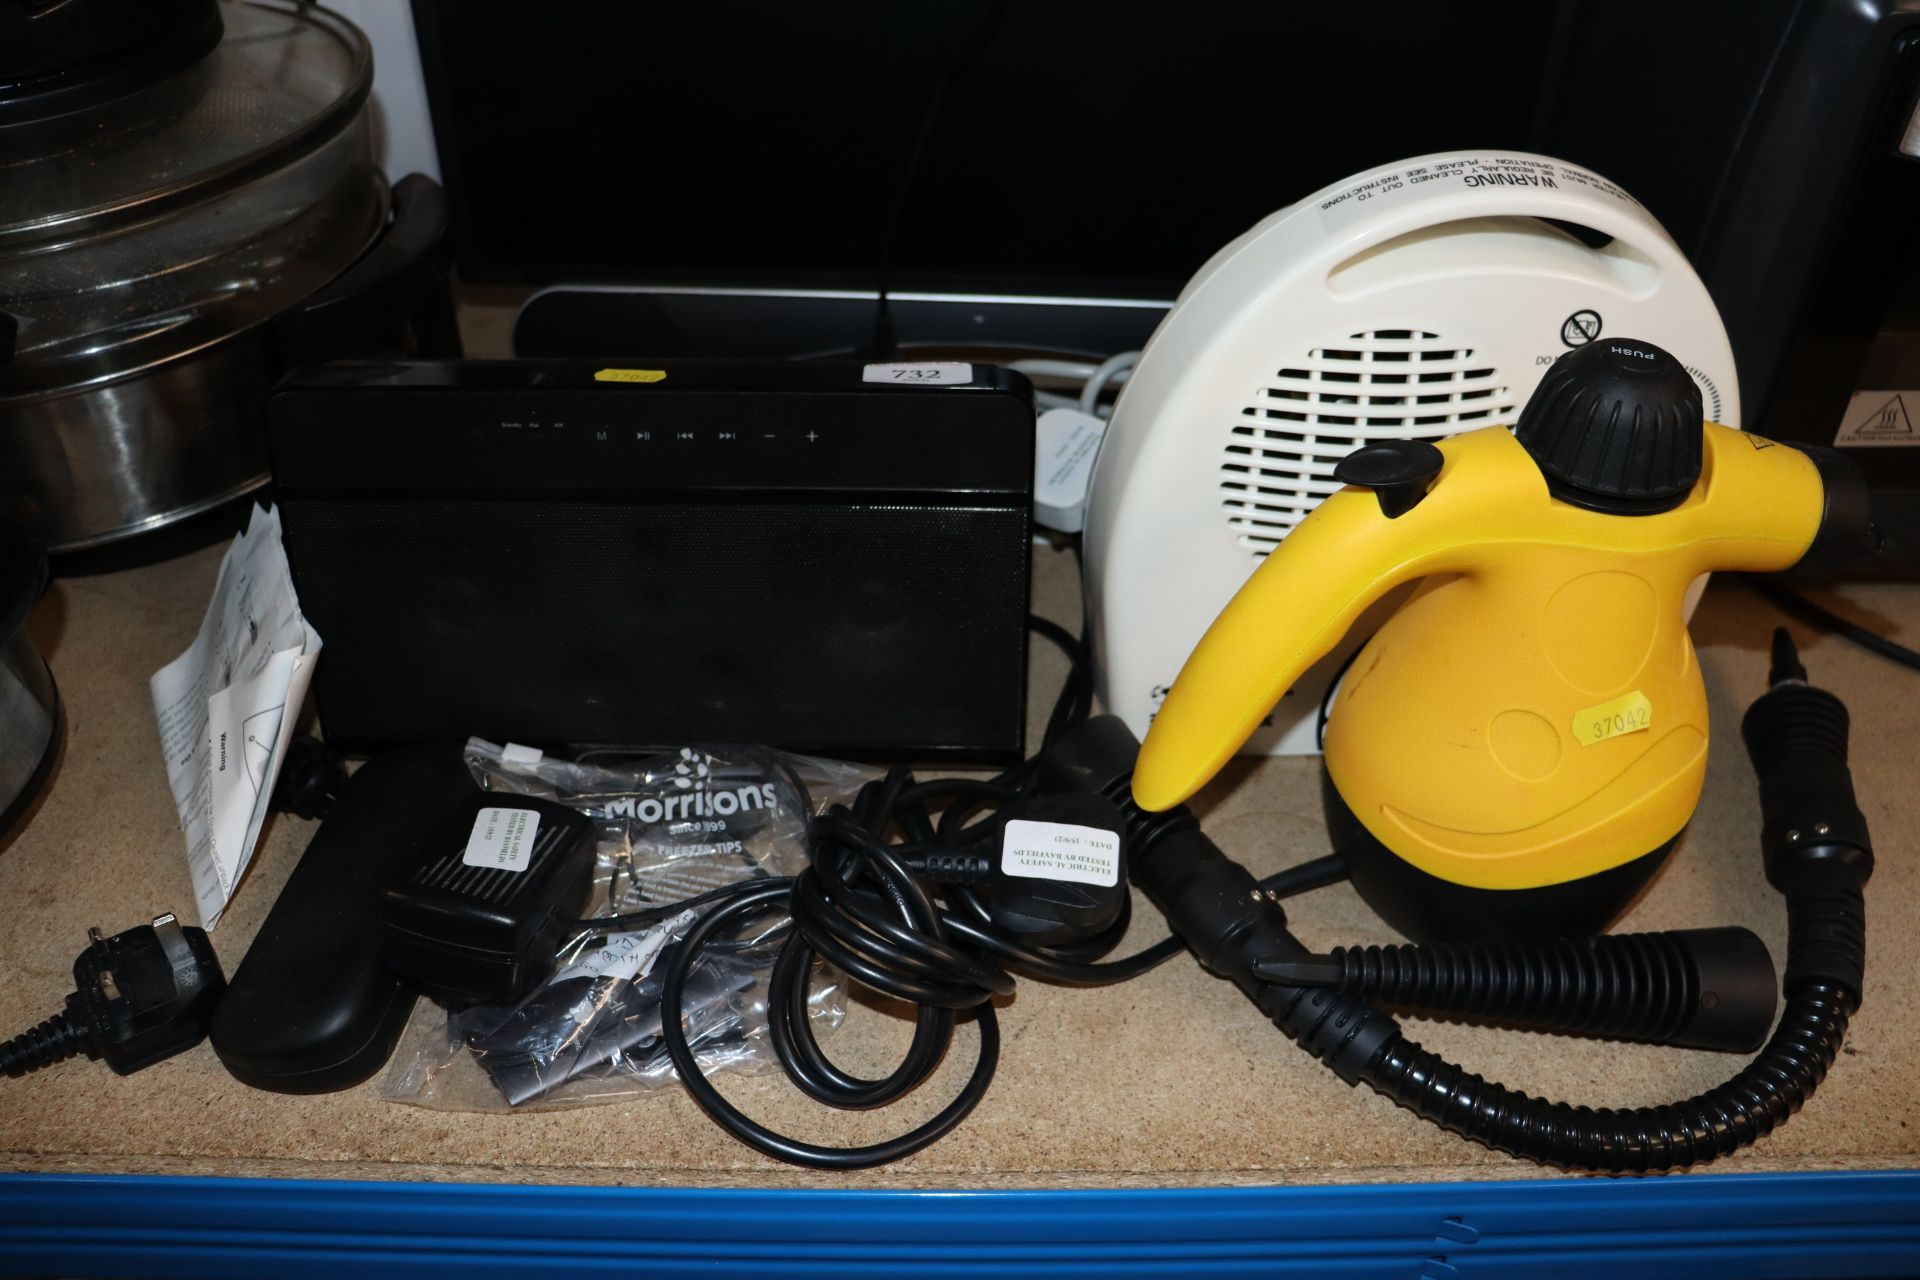 A fan heater, a steam cleaner and a Clarity iPod d